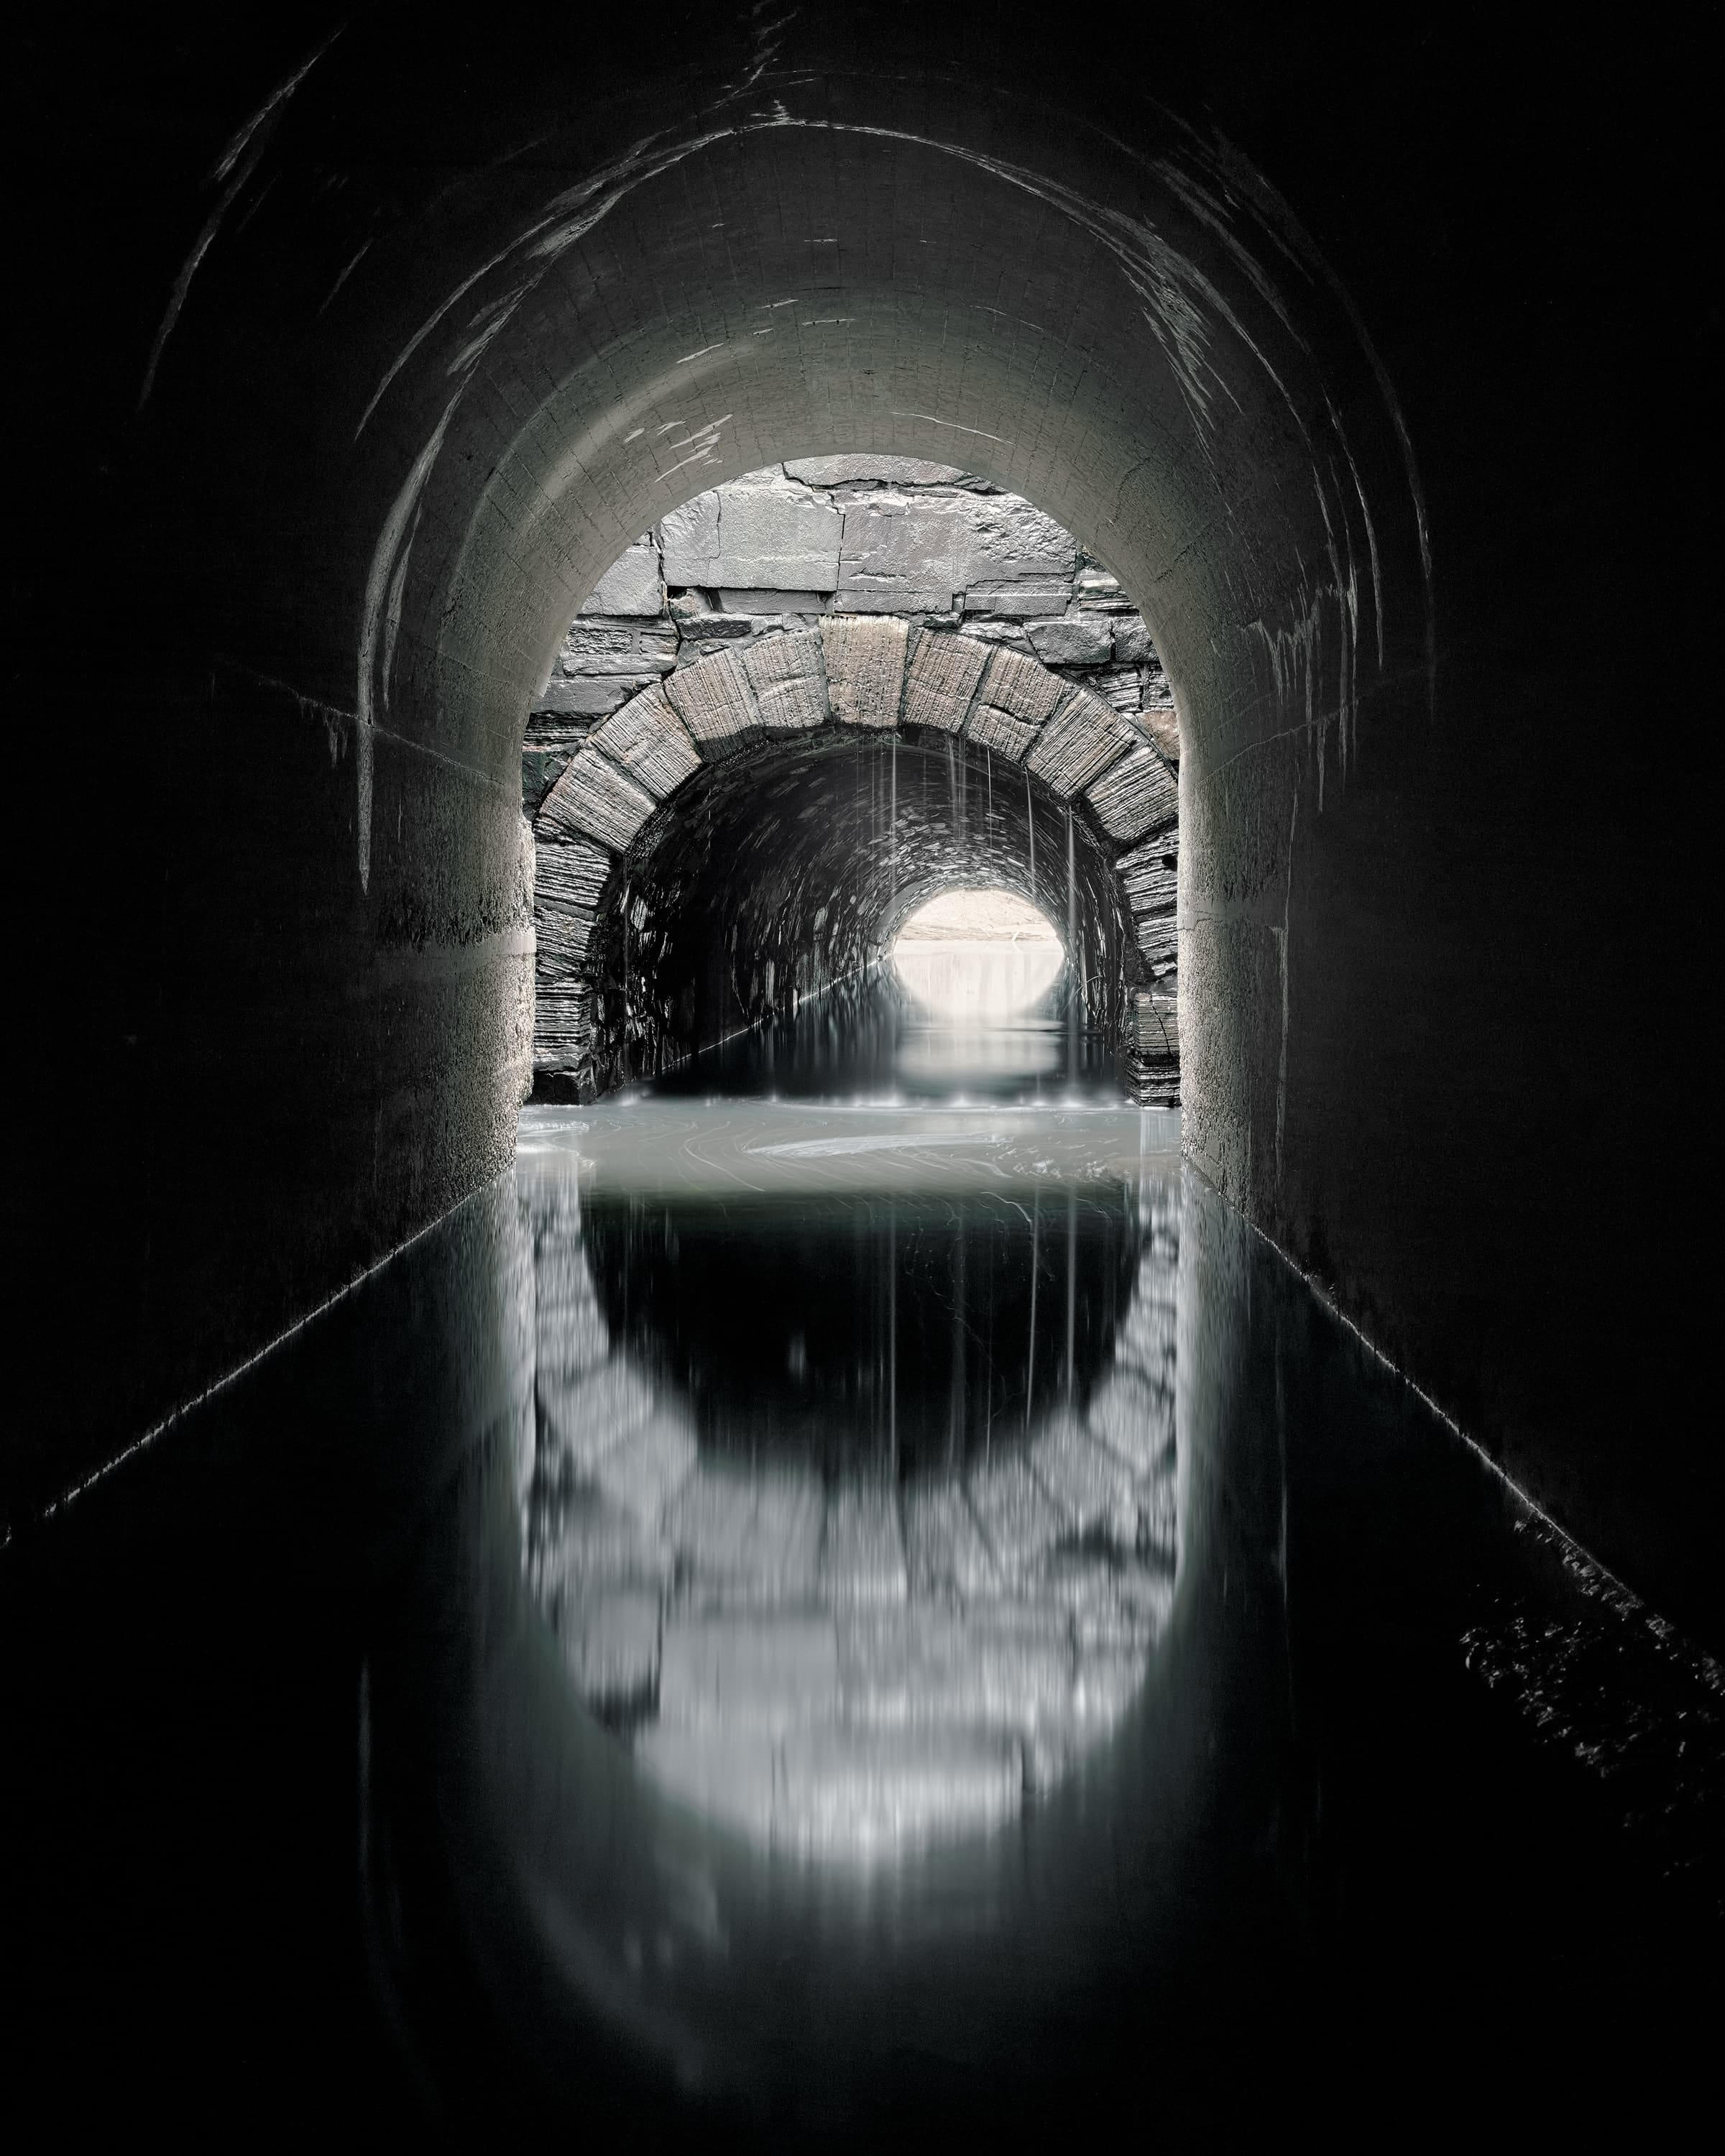 A deep stream runs through two long tunnels, the first cast in concrete, the second in stone. In the second tunnel water is pouring from the roof.